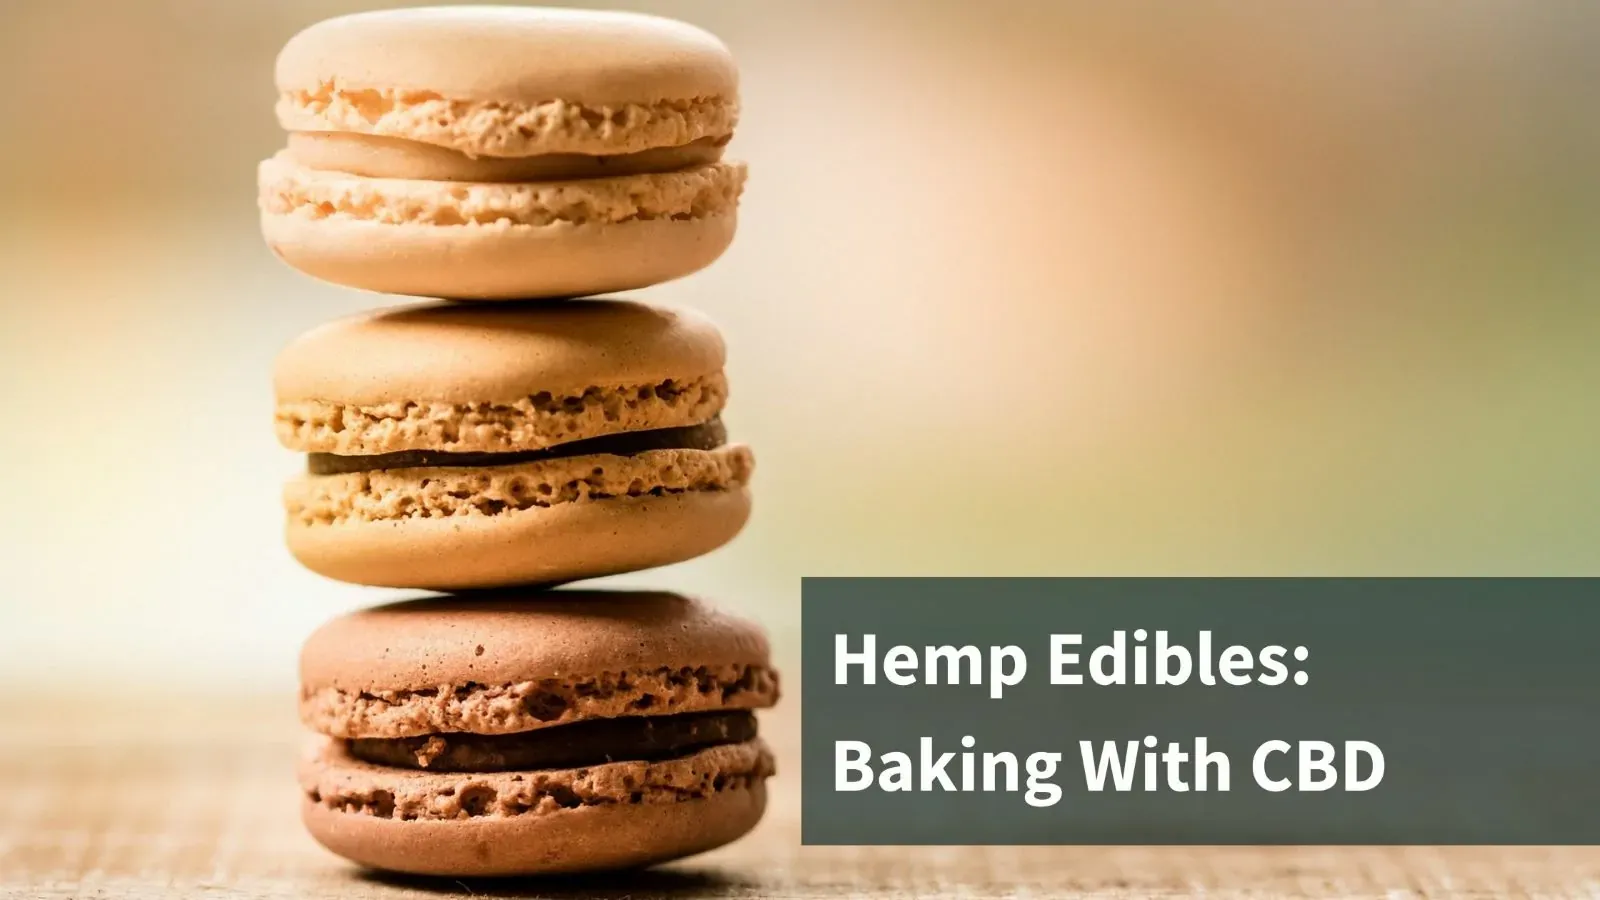 Three macaroons stacked on each other. Text reads "Hemp Edibles: Baking with CBD."